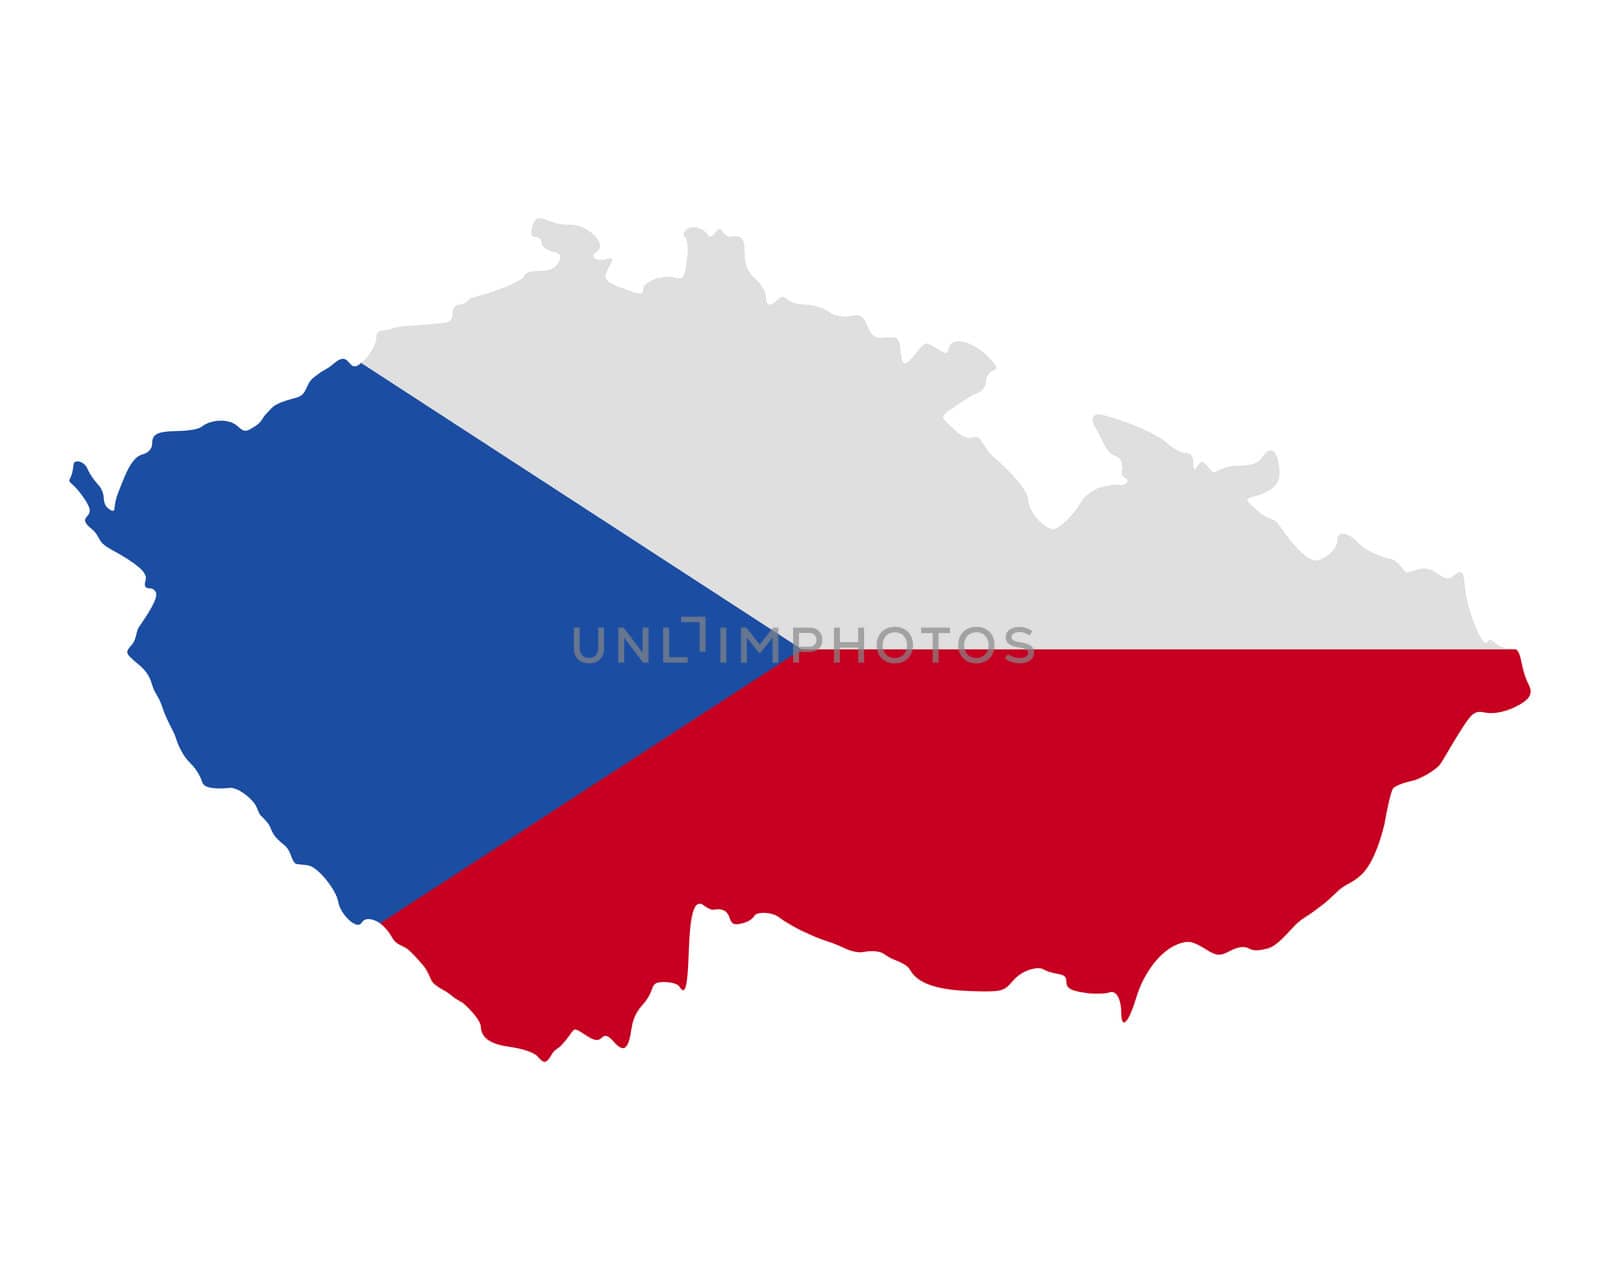 Map and flag of Czech Republic by rbiedermann